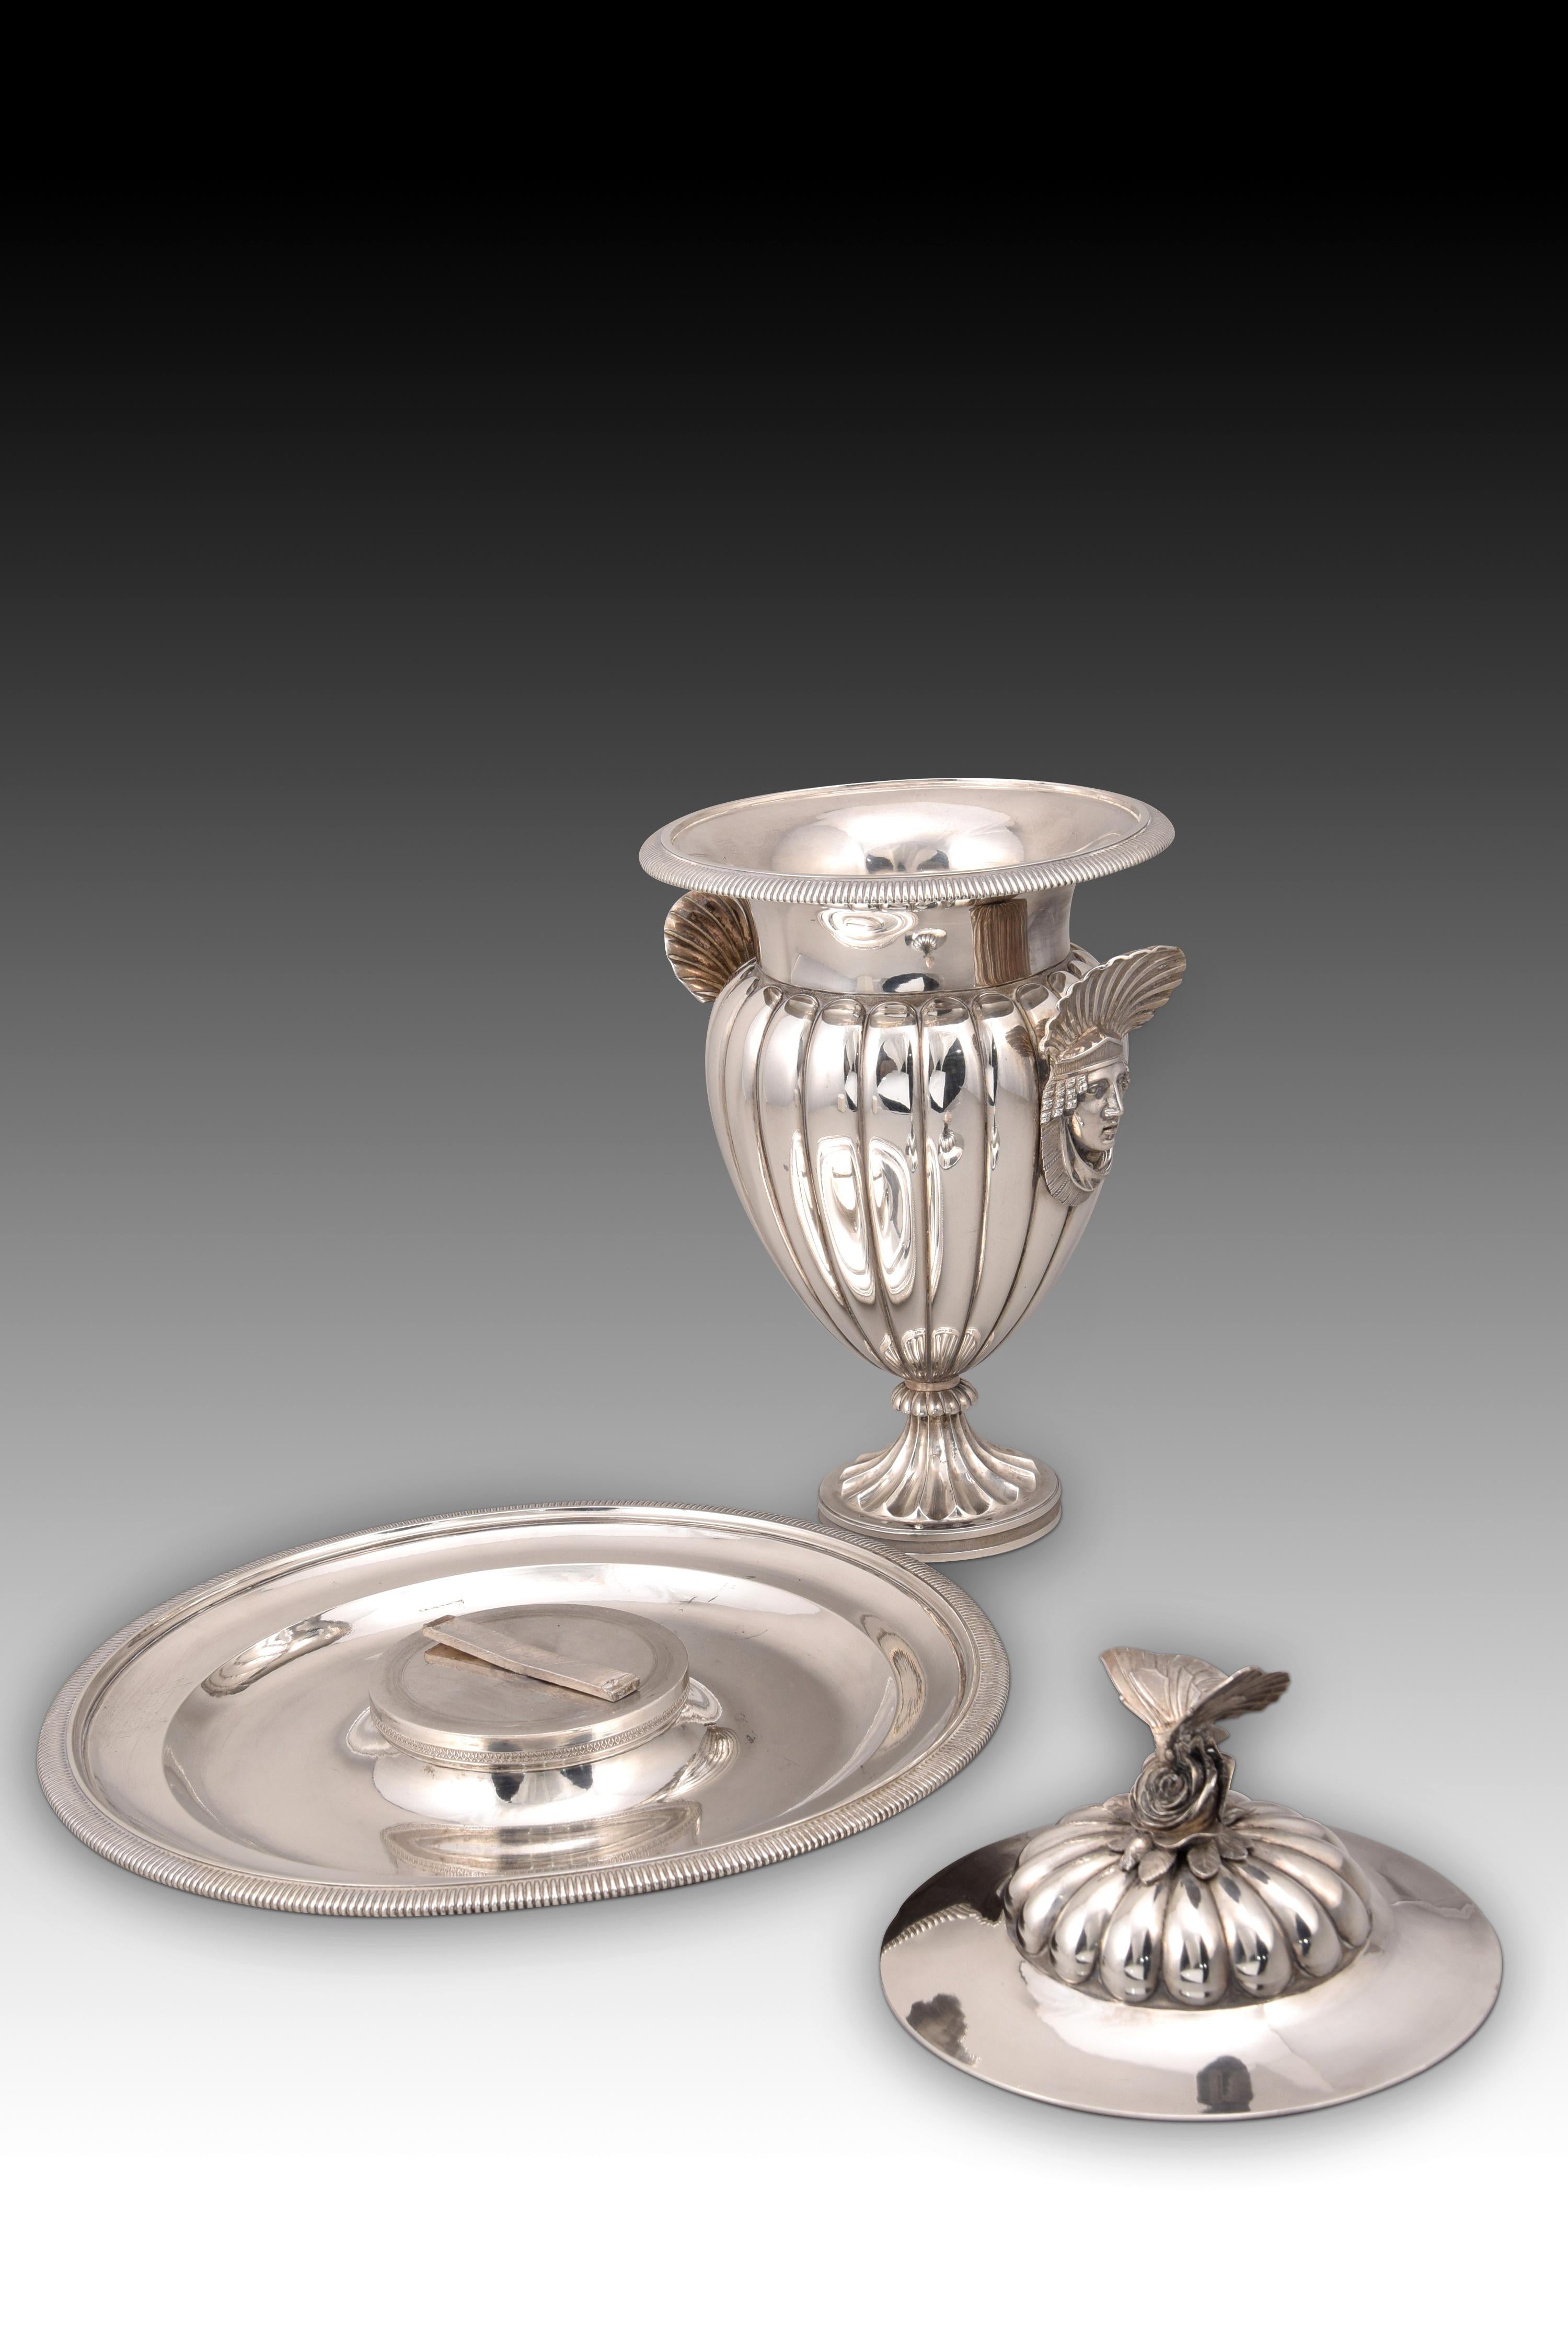 Cup with tray. Royal Silver Factory of Antonio Martínez. Madrid, Spain, 1830s. For Sale 3